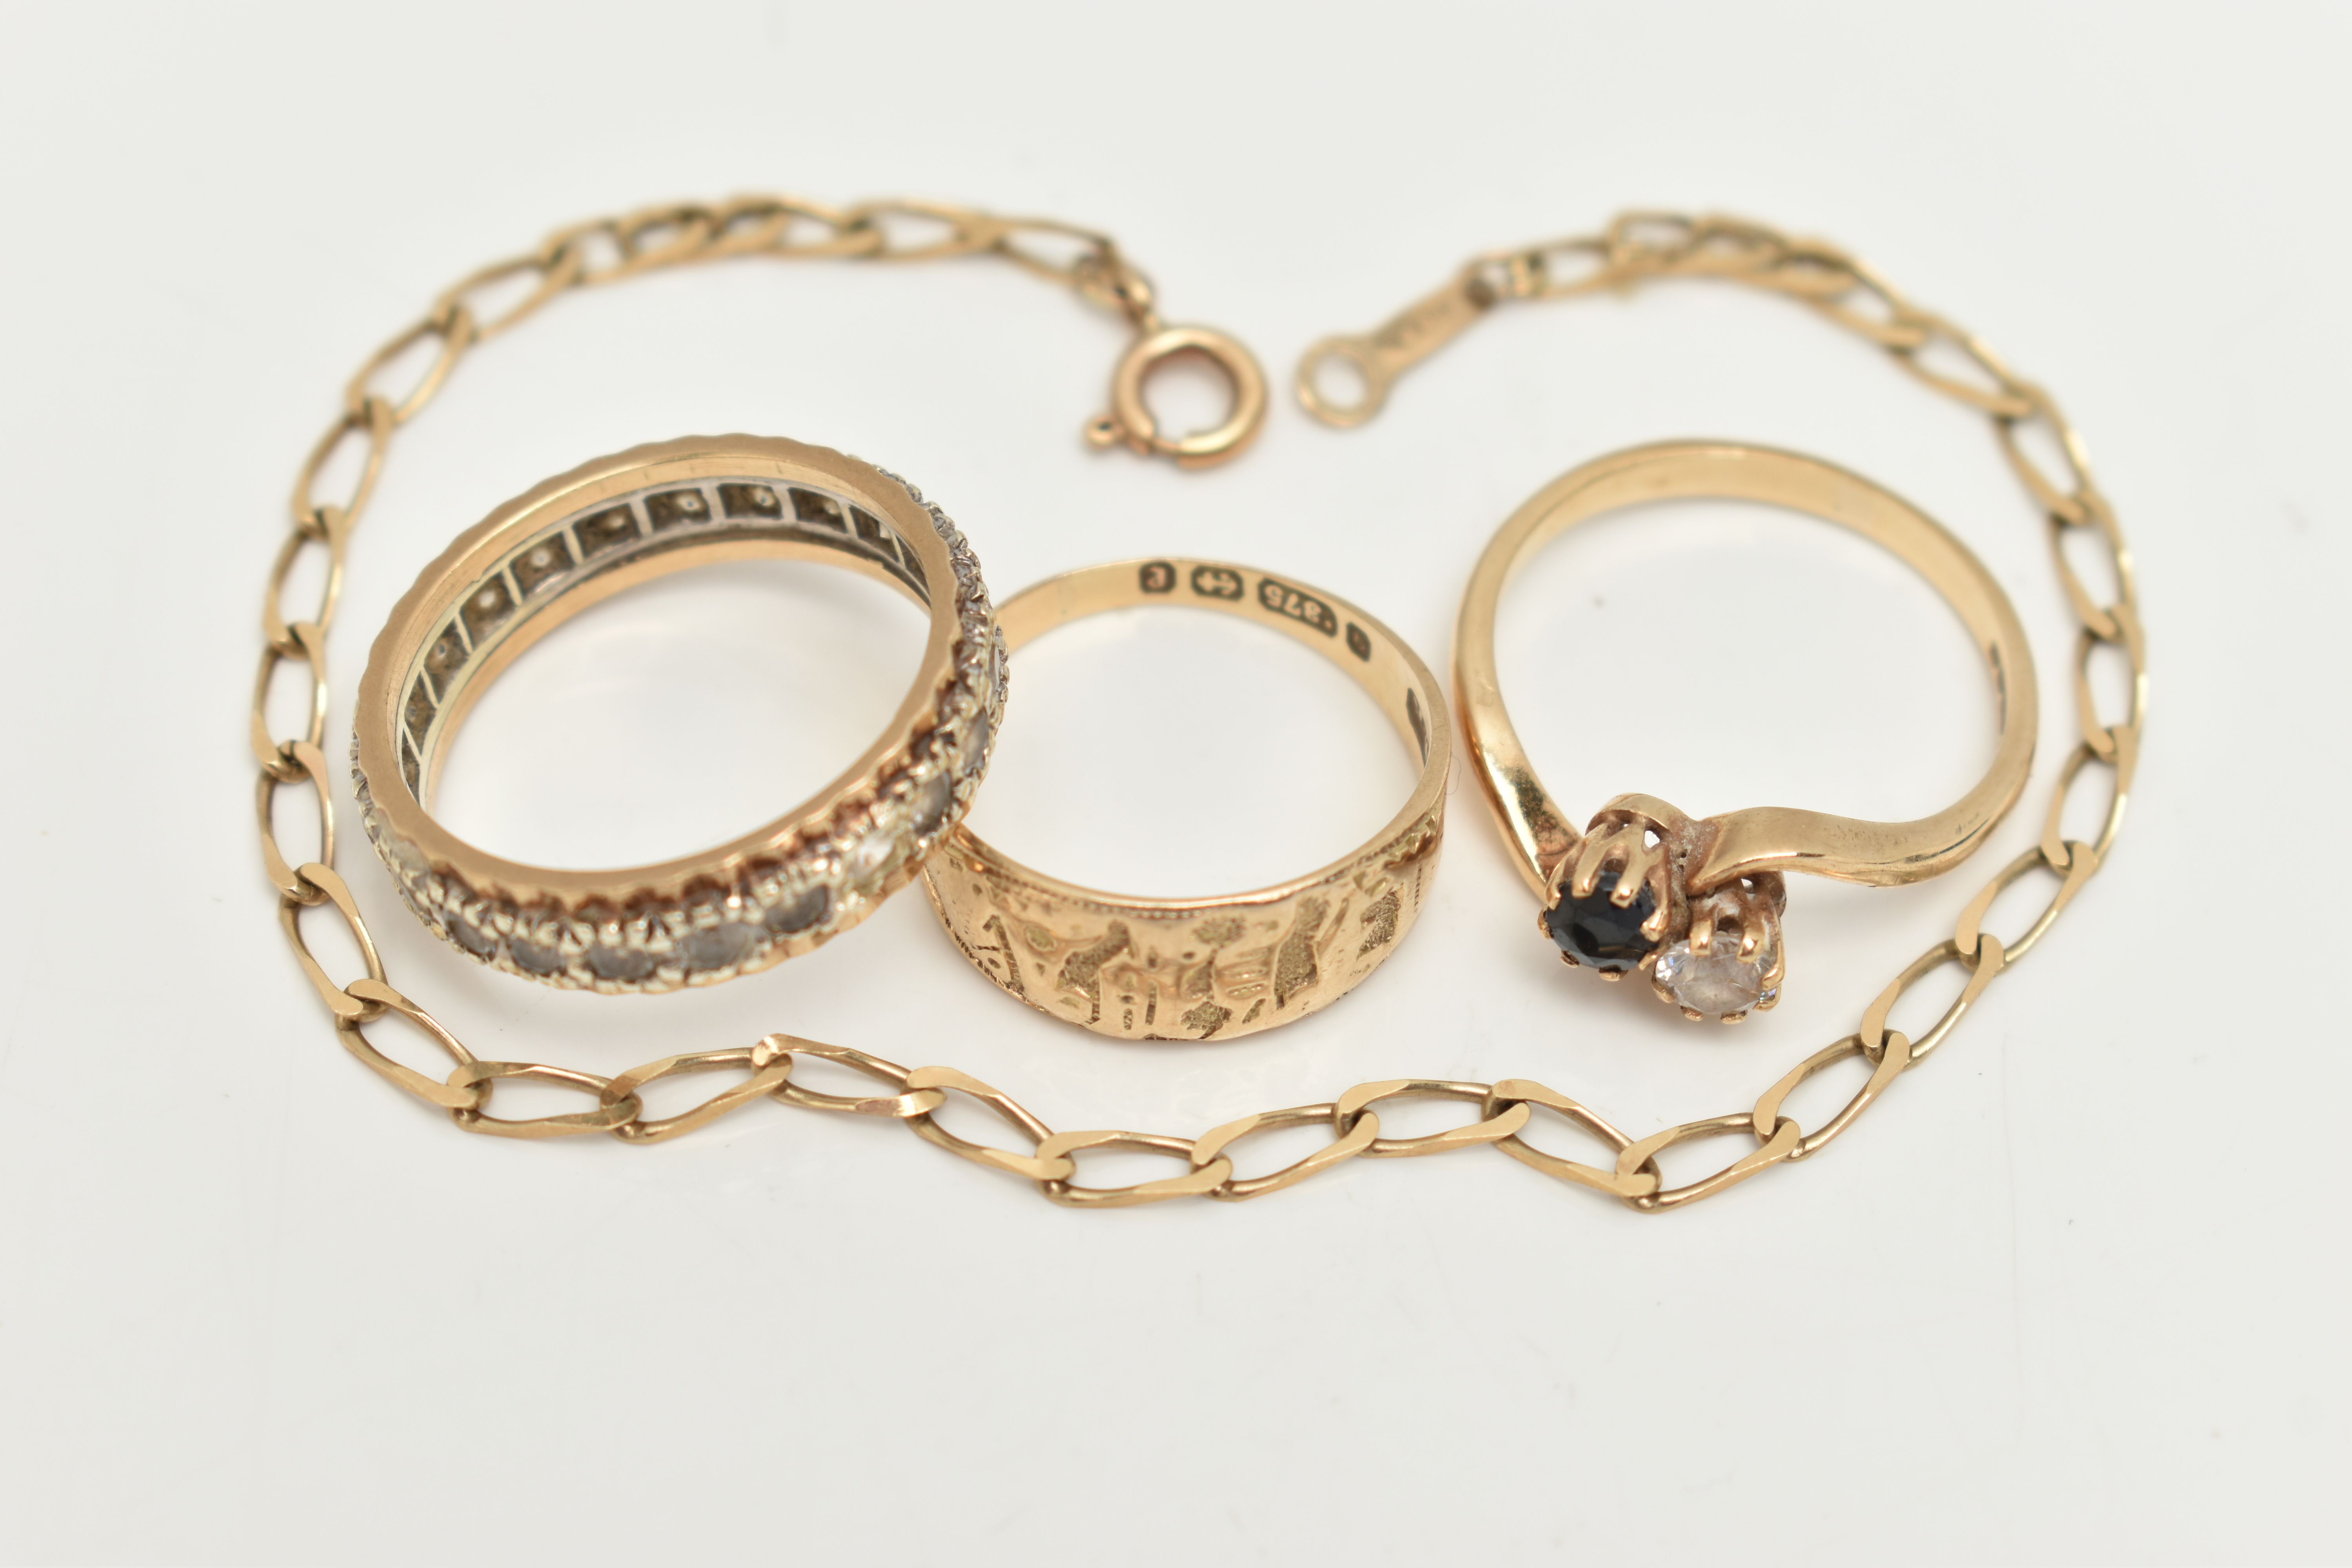 A 9CT GOLD BRACELET AND THREE RINGS, a yellow gold elongated curb link bracelet, fitted with a - Image 2 of 5